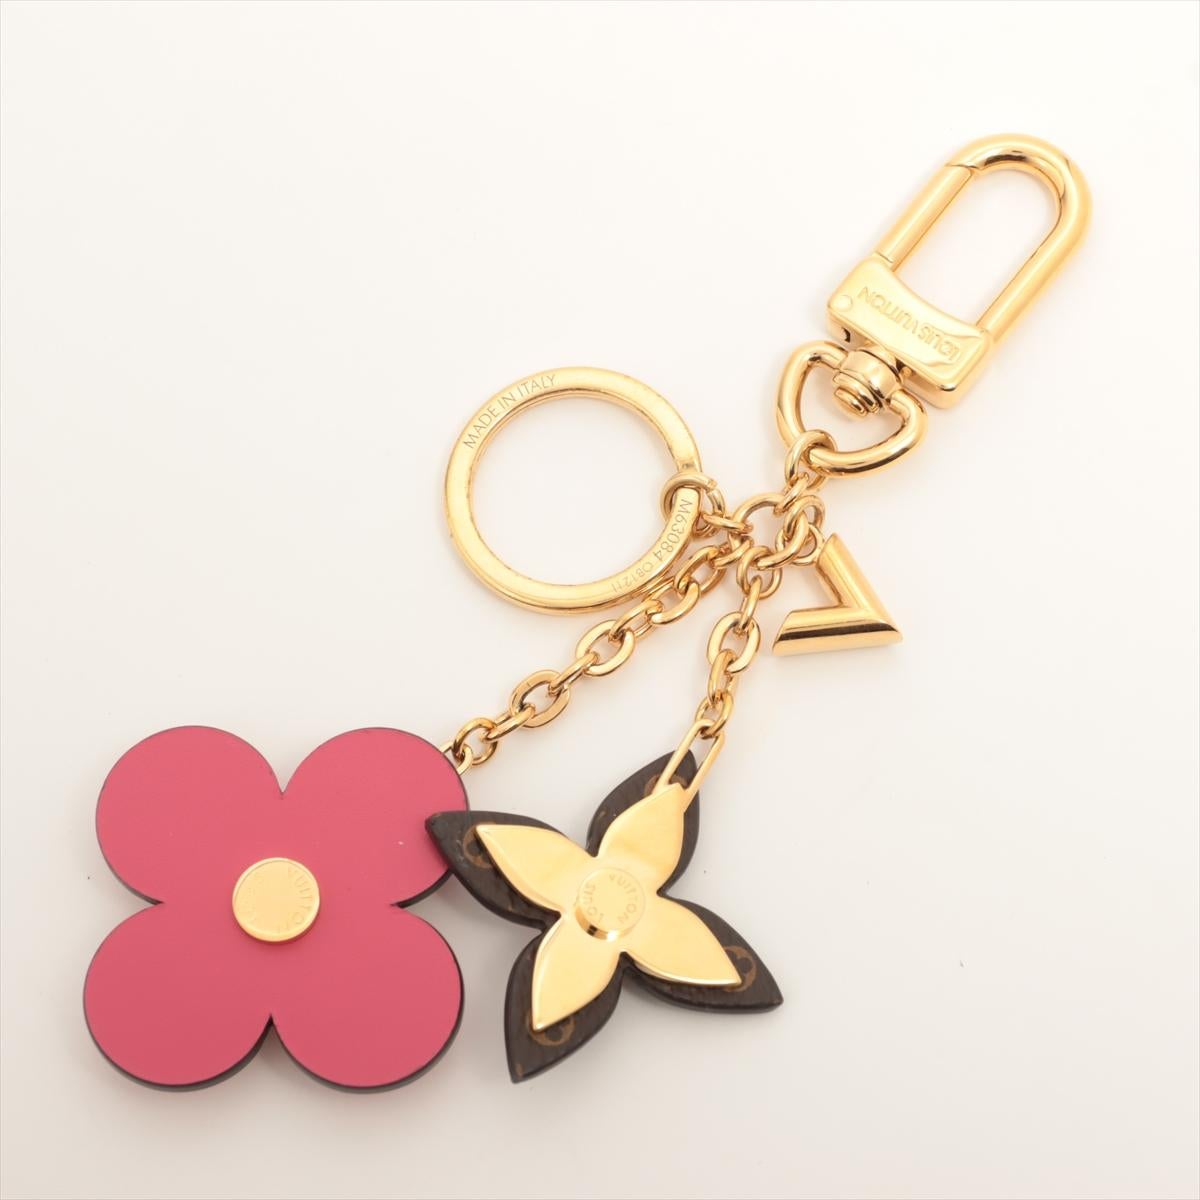 Louis Vuitton Monogram Blooming Flowers Bag Charm In Good Condition For Sale In Indianapolis, IN